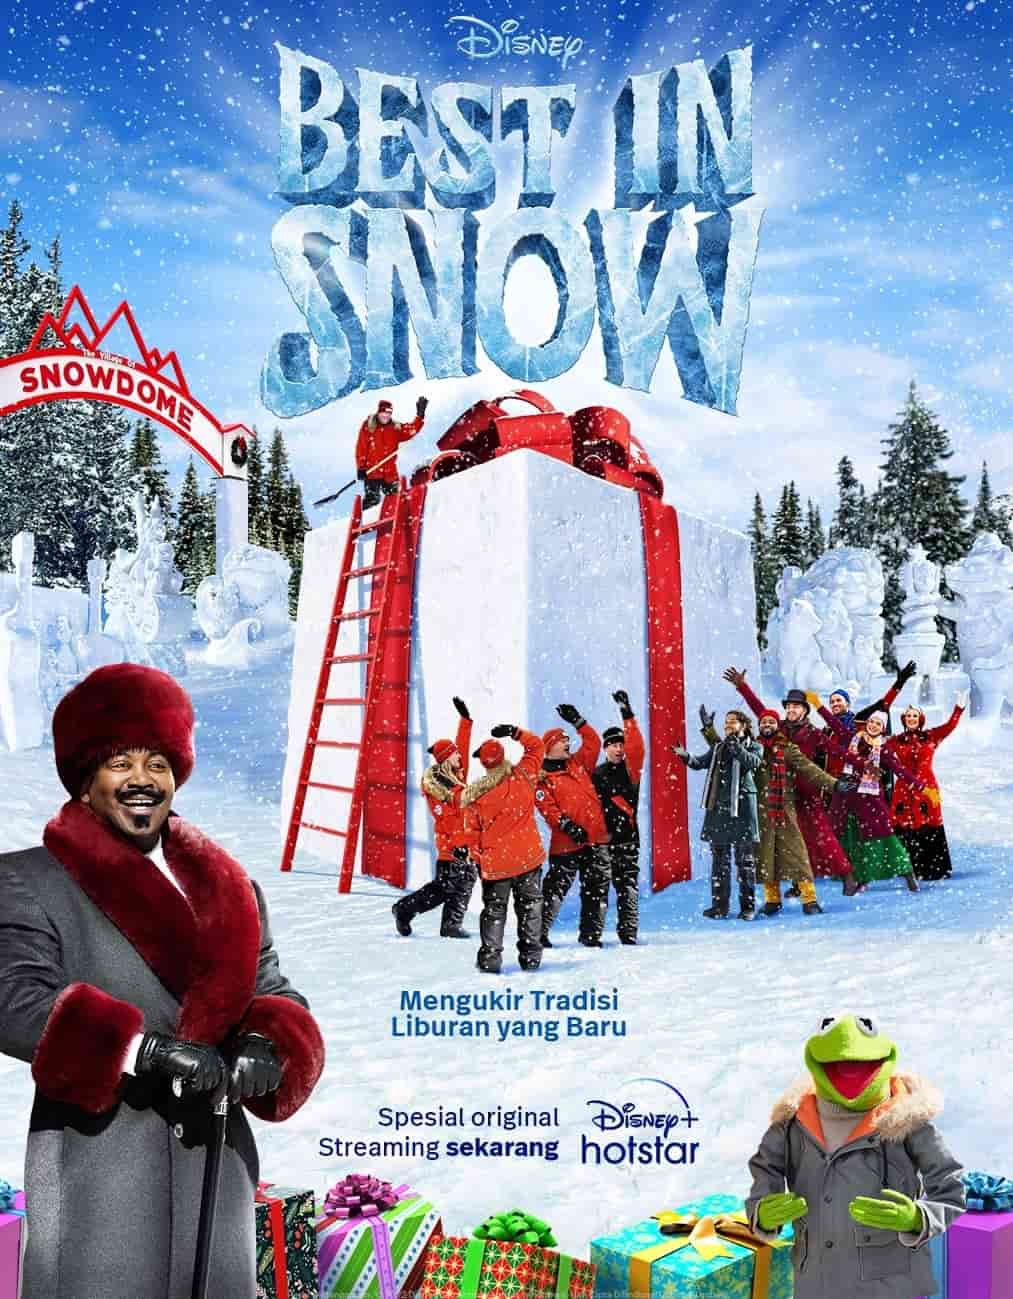 Best In Snow - Sinopsis, Pemain, OST, Episode, Review